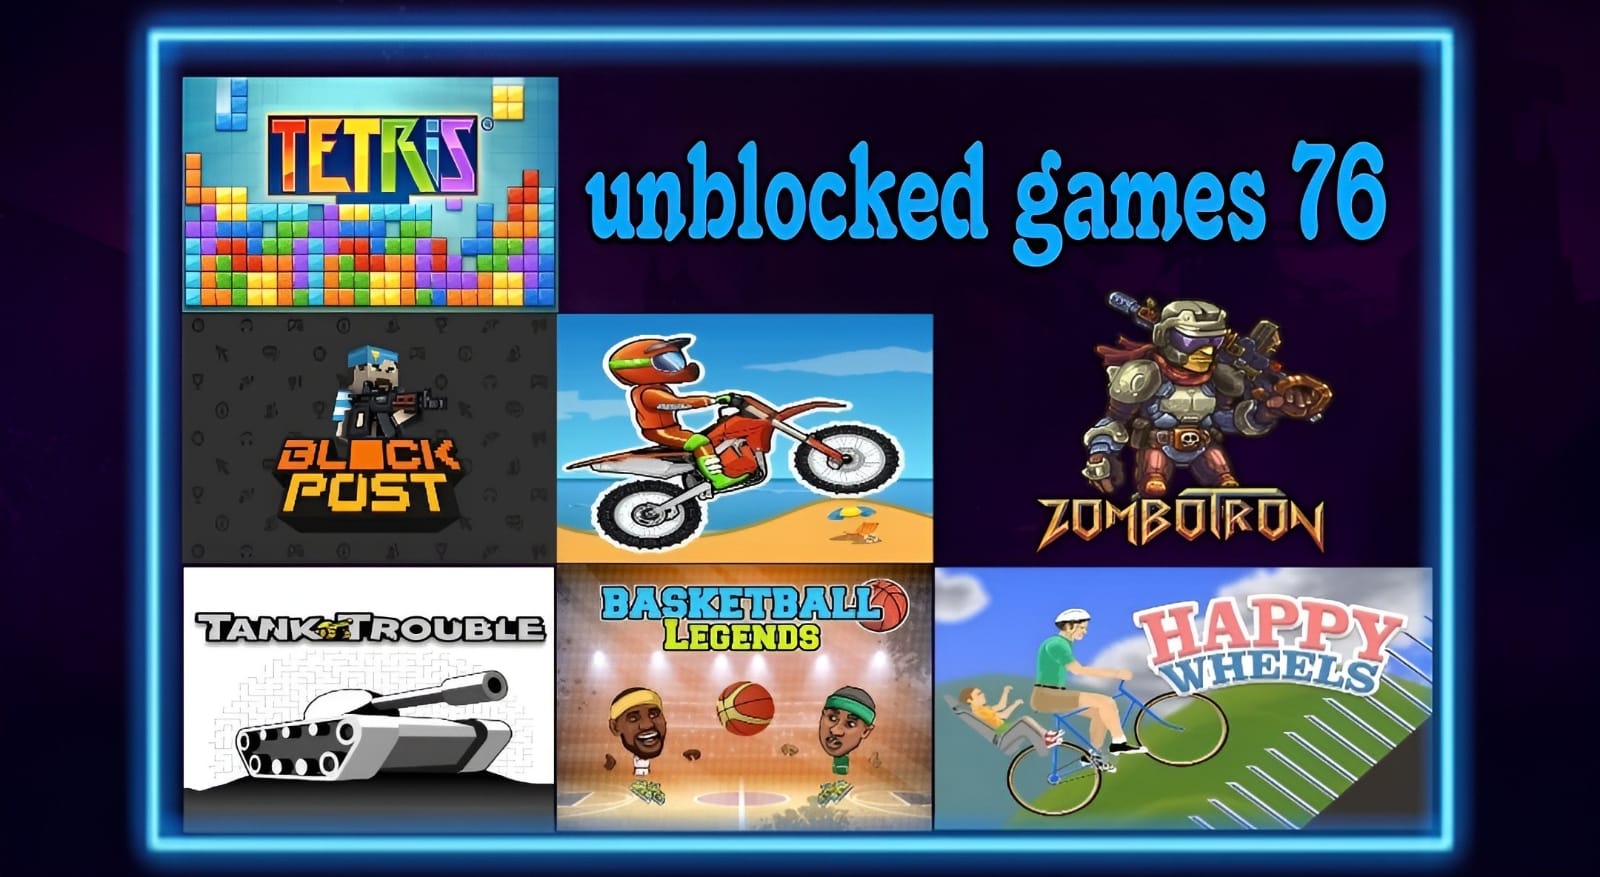 New unblocked games